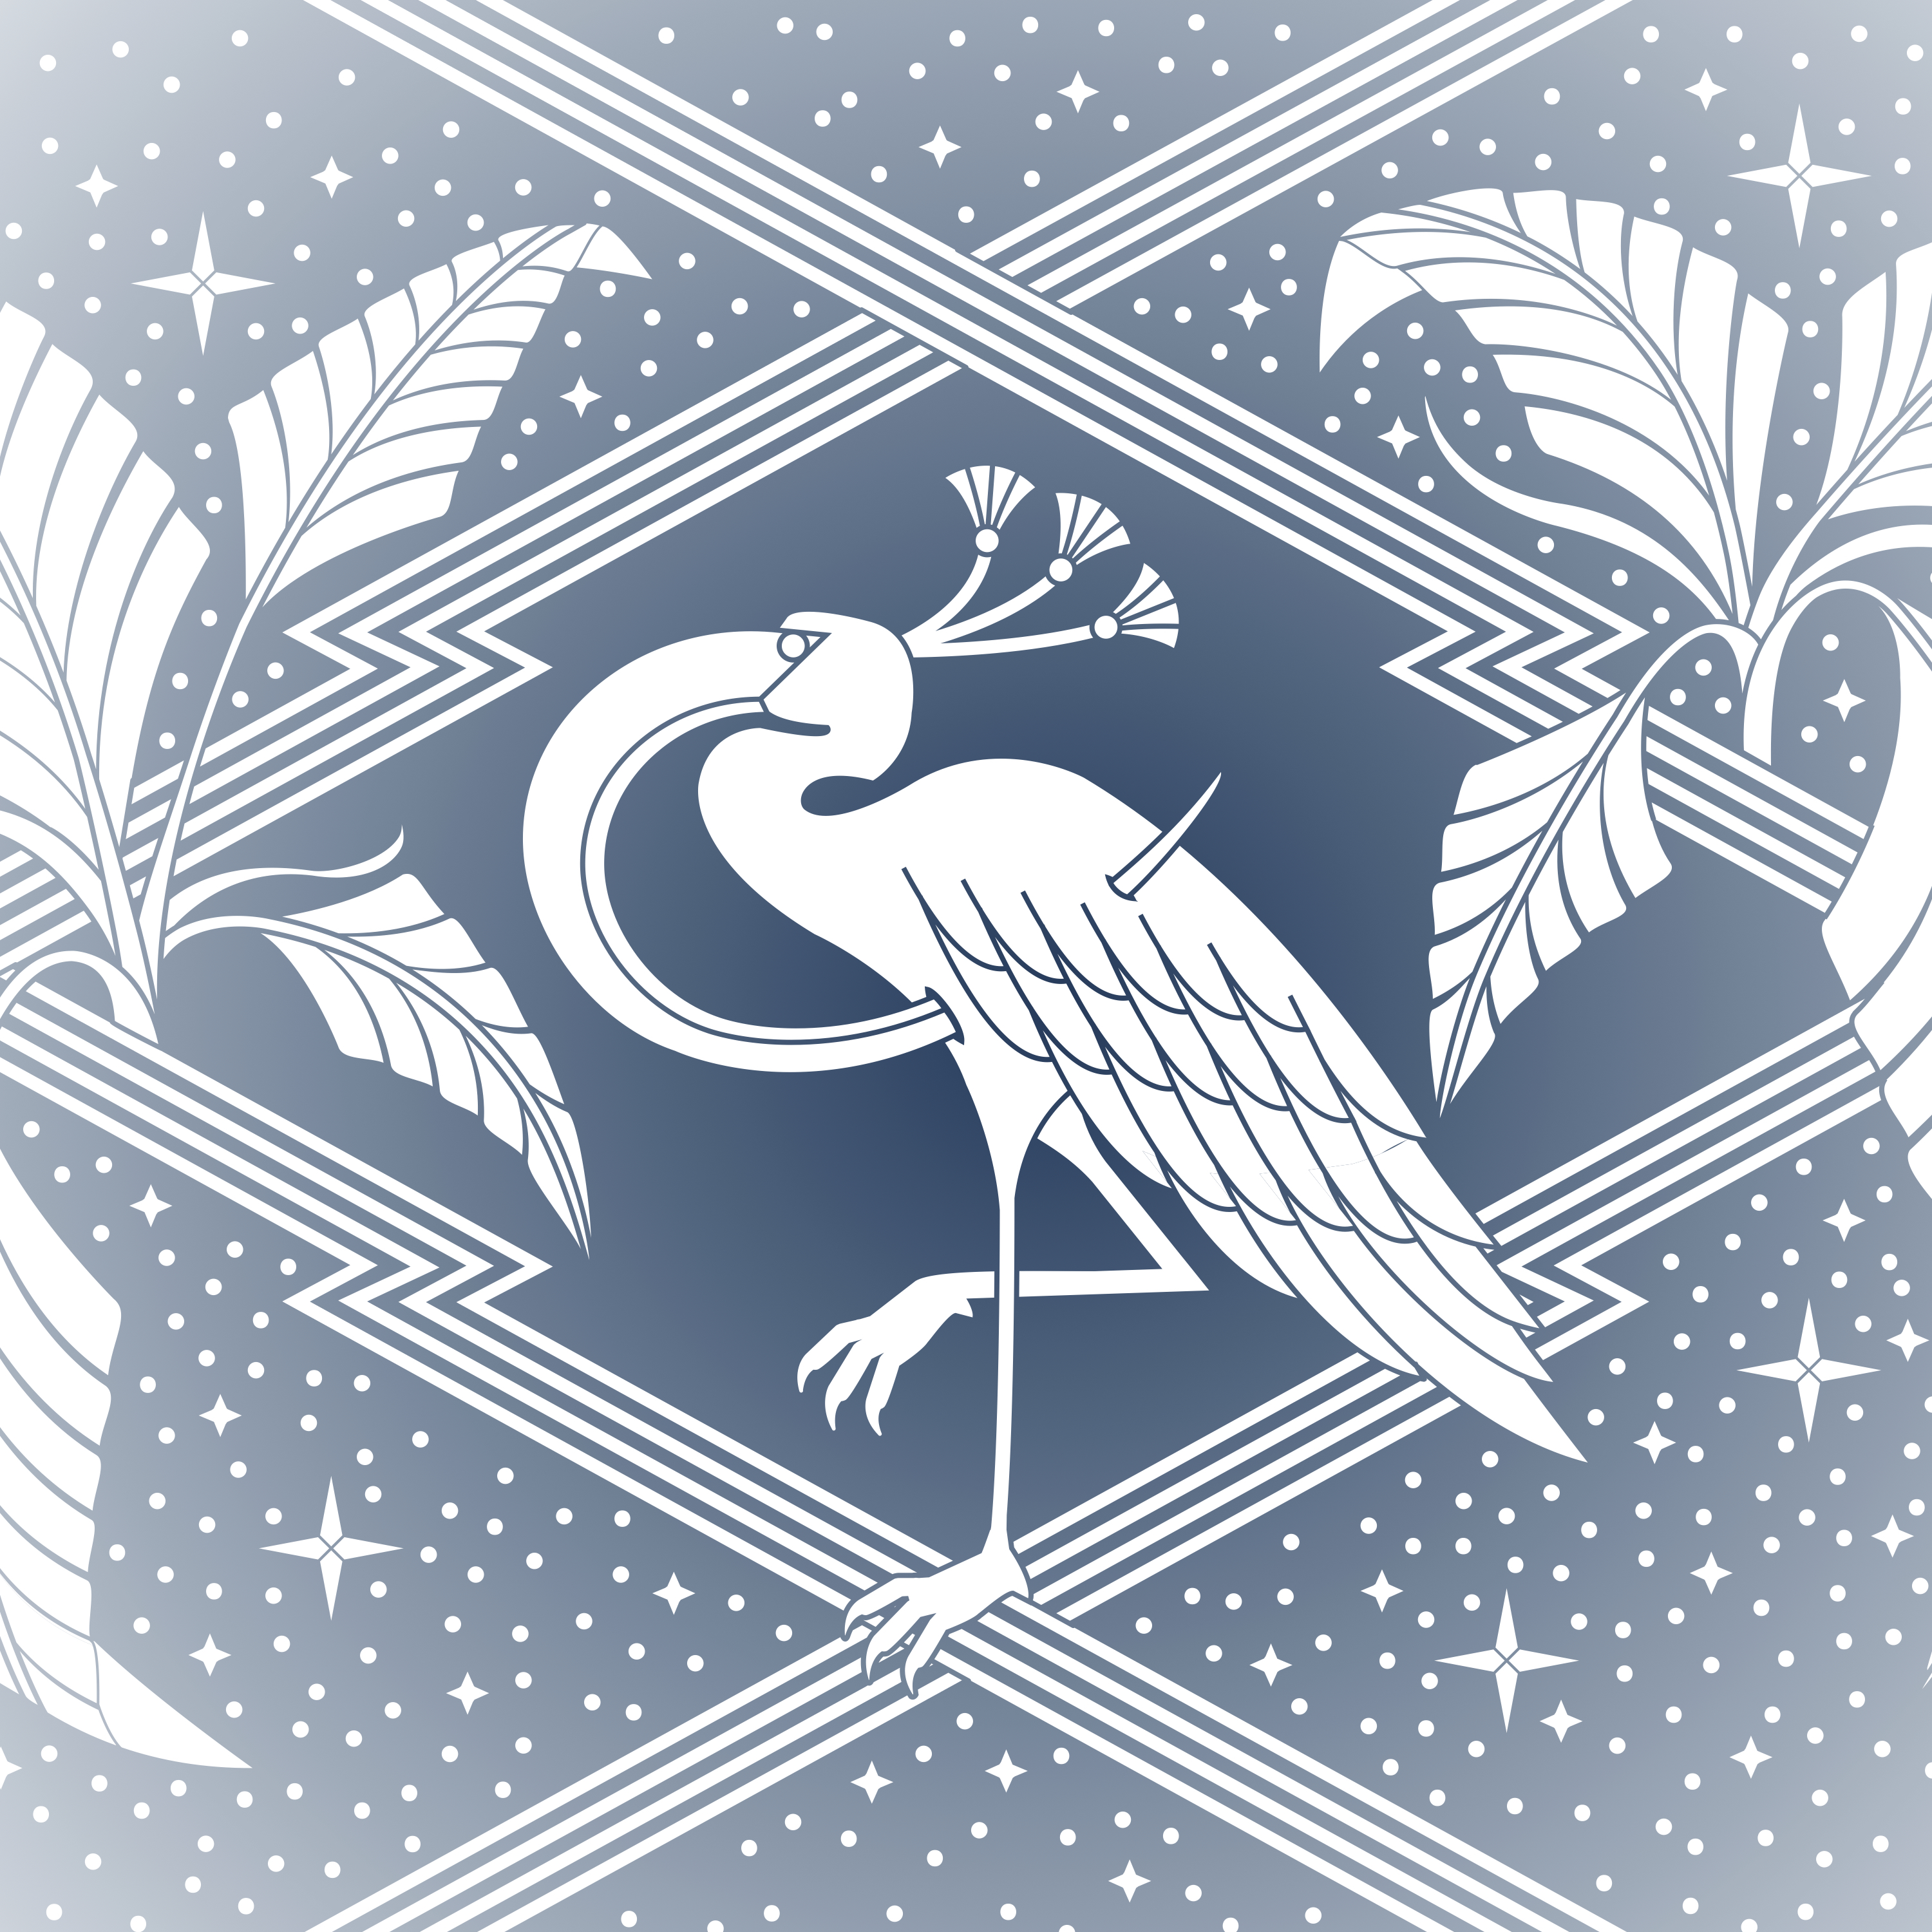 A design in blue and white. The design features a large bird with an arch shaped beak standing on one leg. Around the bird are some stars and dots, thick straight lines, and plants. 